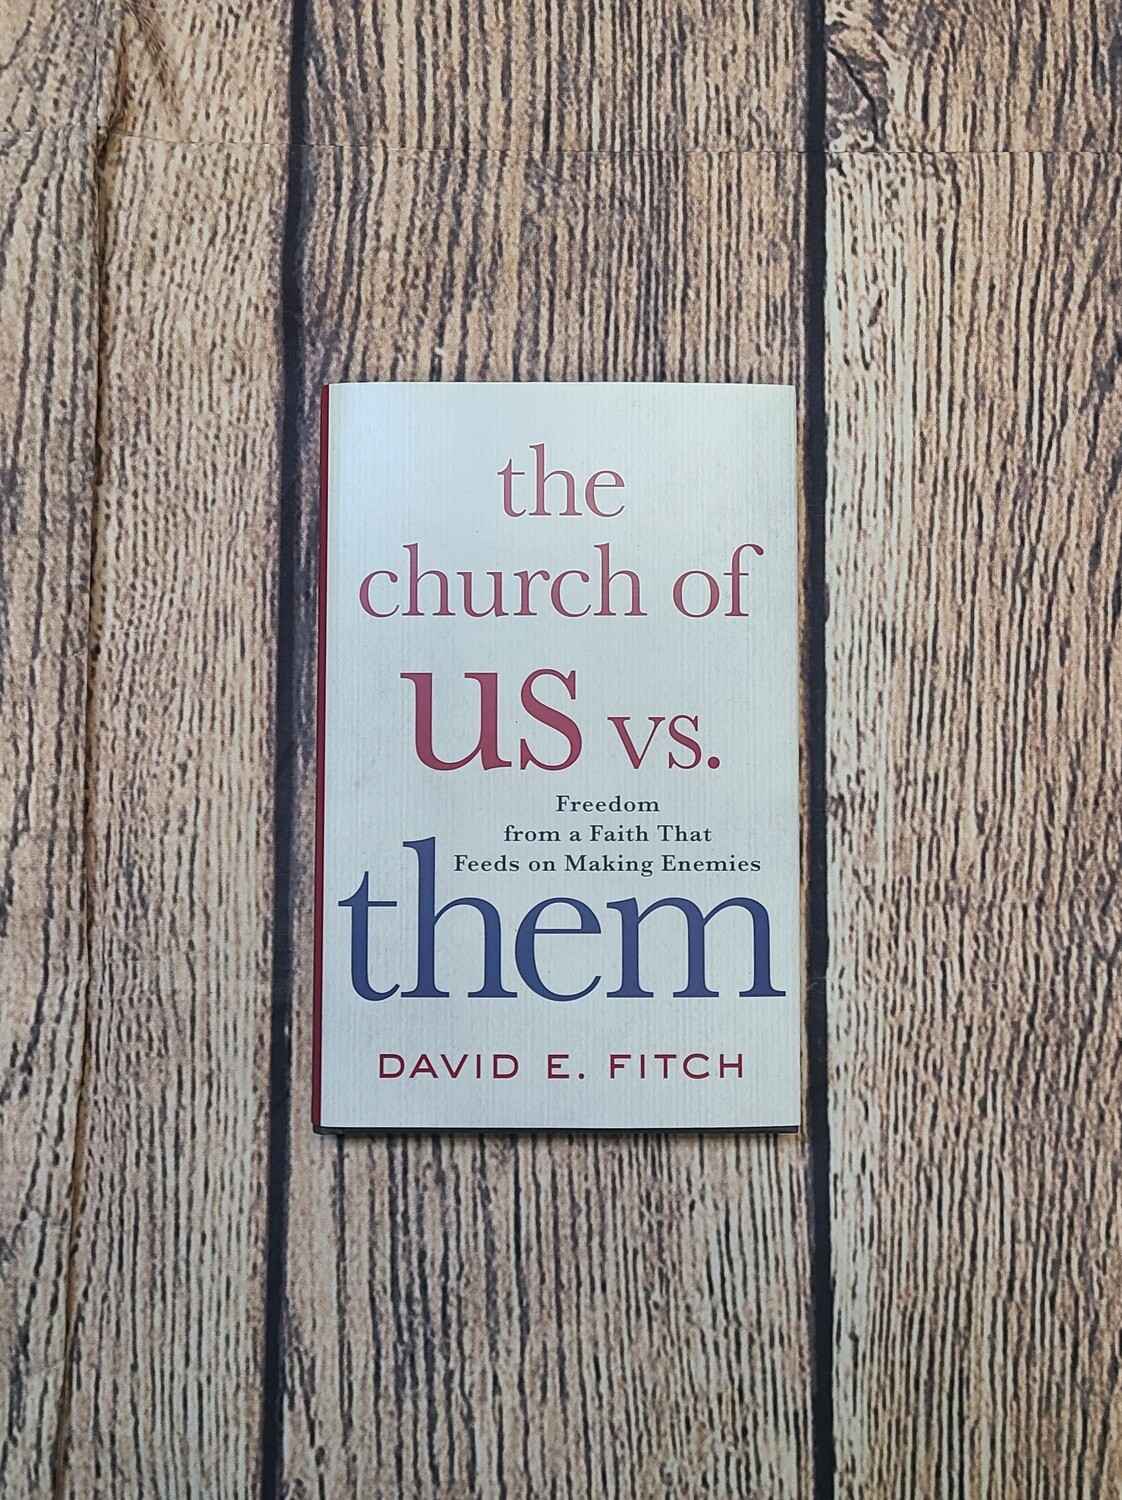 The Church of Us vs Them: Freedom from a Faith that Feeds on Making Enemies by David E. Fitch